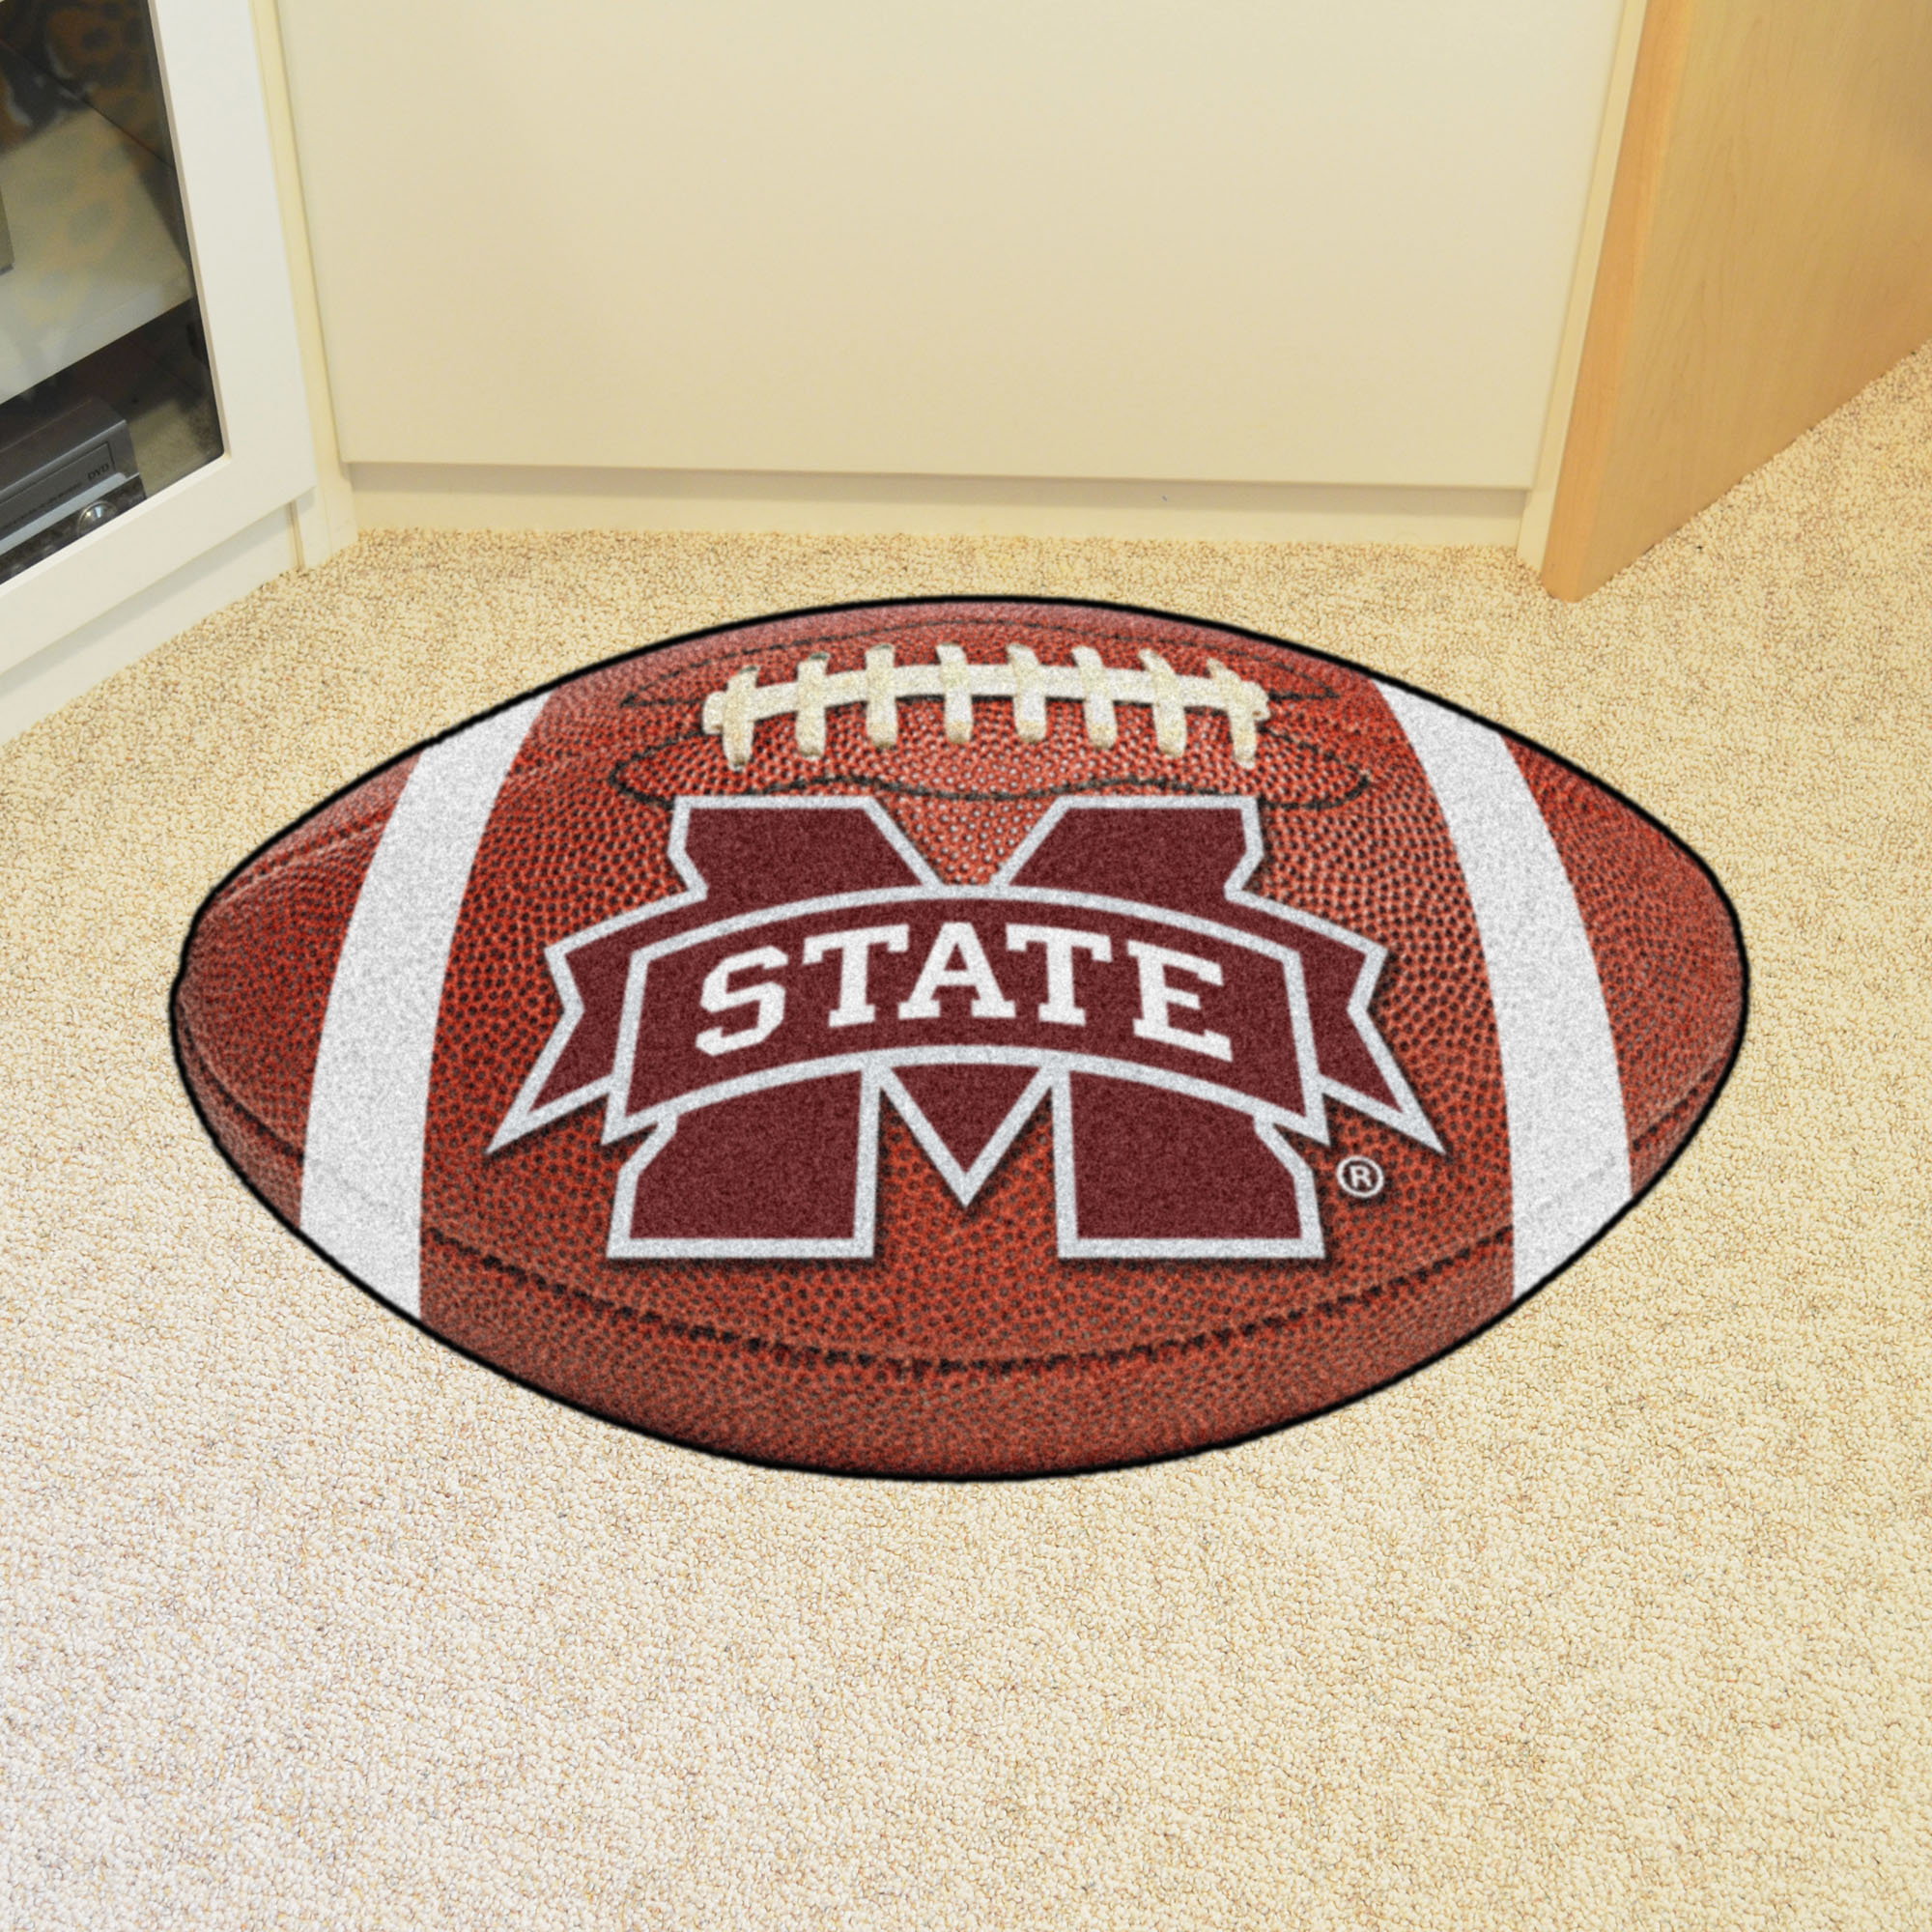 Mississippi State University Ball Shaped Area Rugs (Ball Shaped Area Rugs: Football)